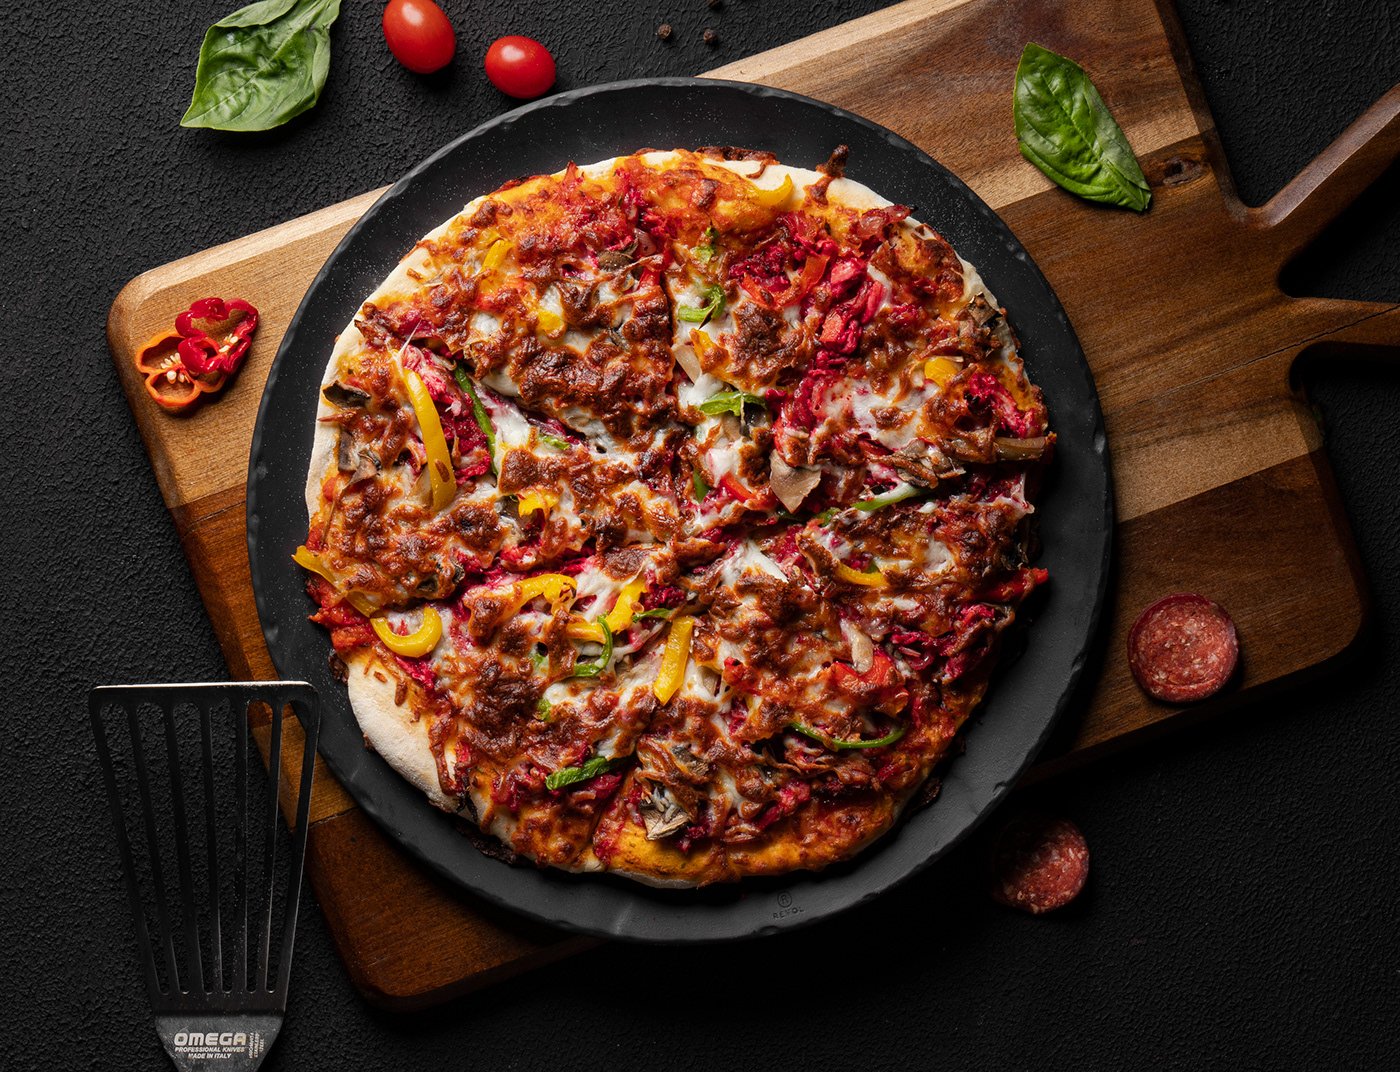 Food  homestyle Photography  Pizza